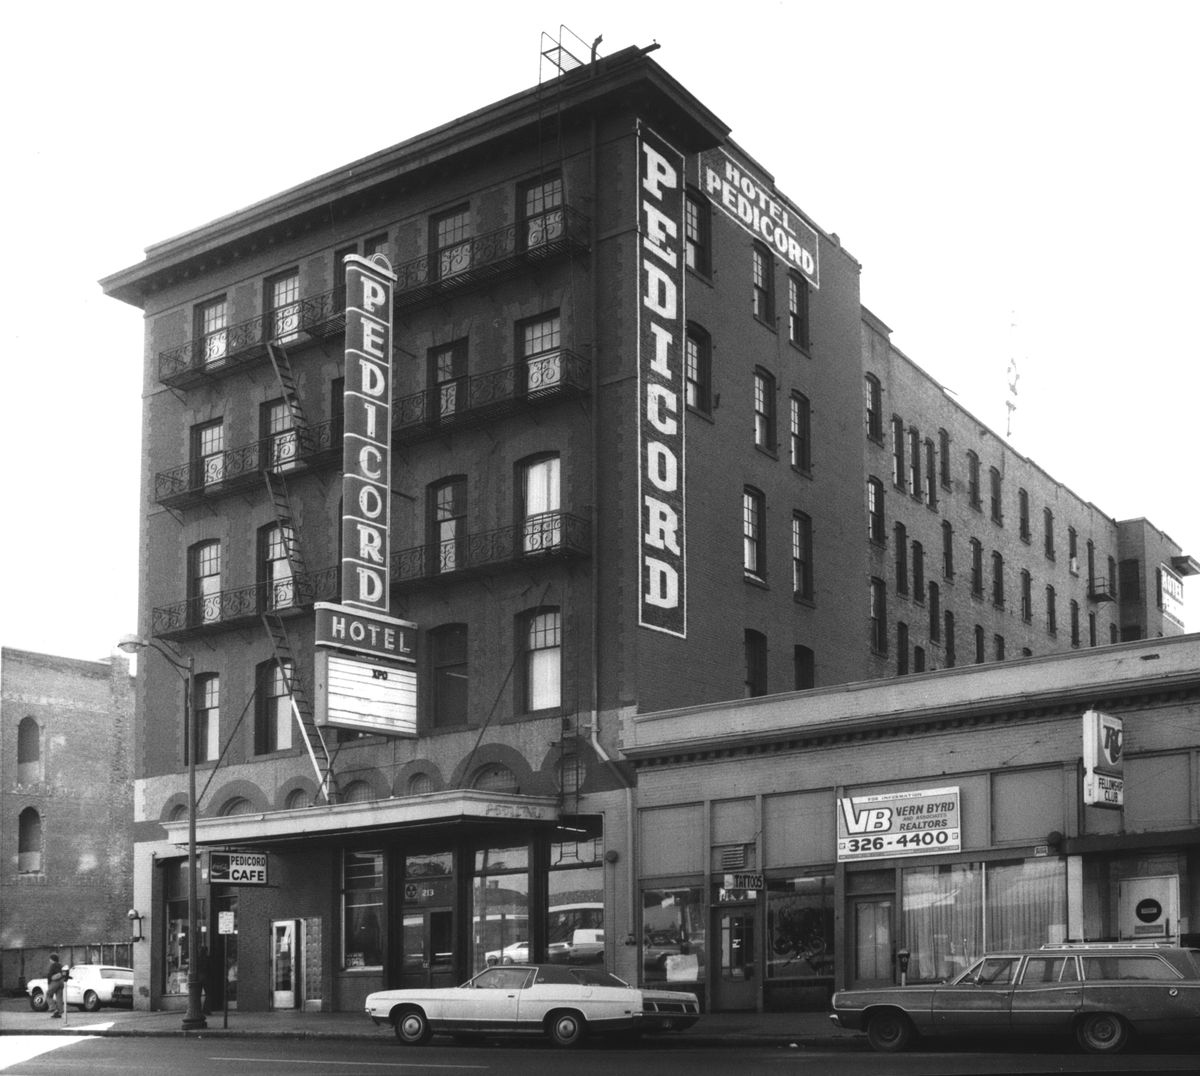 1979: In the last days of the 1893 Pedicord Hotel, the once popular hotel became a monthly rental apartment building. Artist Ed Kienholz and wife Nancy prowled the hotel just before demolition and salvaged parts for their installation piece “Sollie 17.” The location is now a parking lot. (Spokesman-Review Photo Archive / SR)